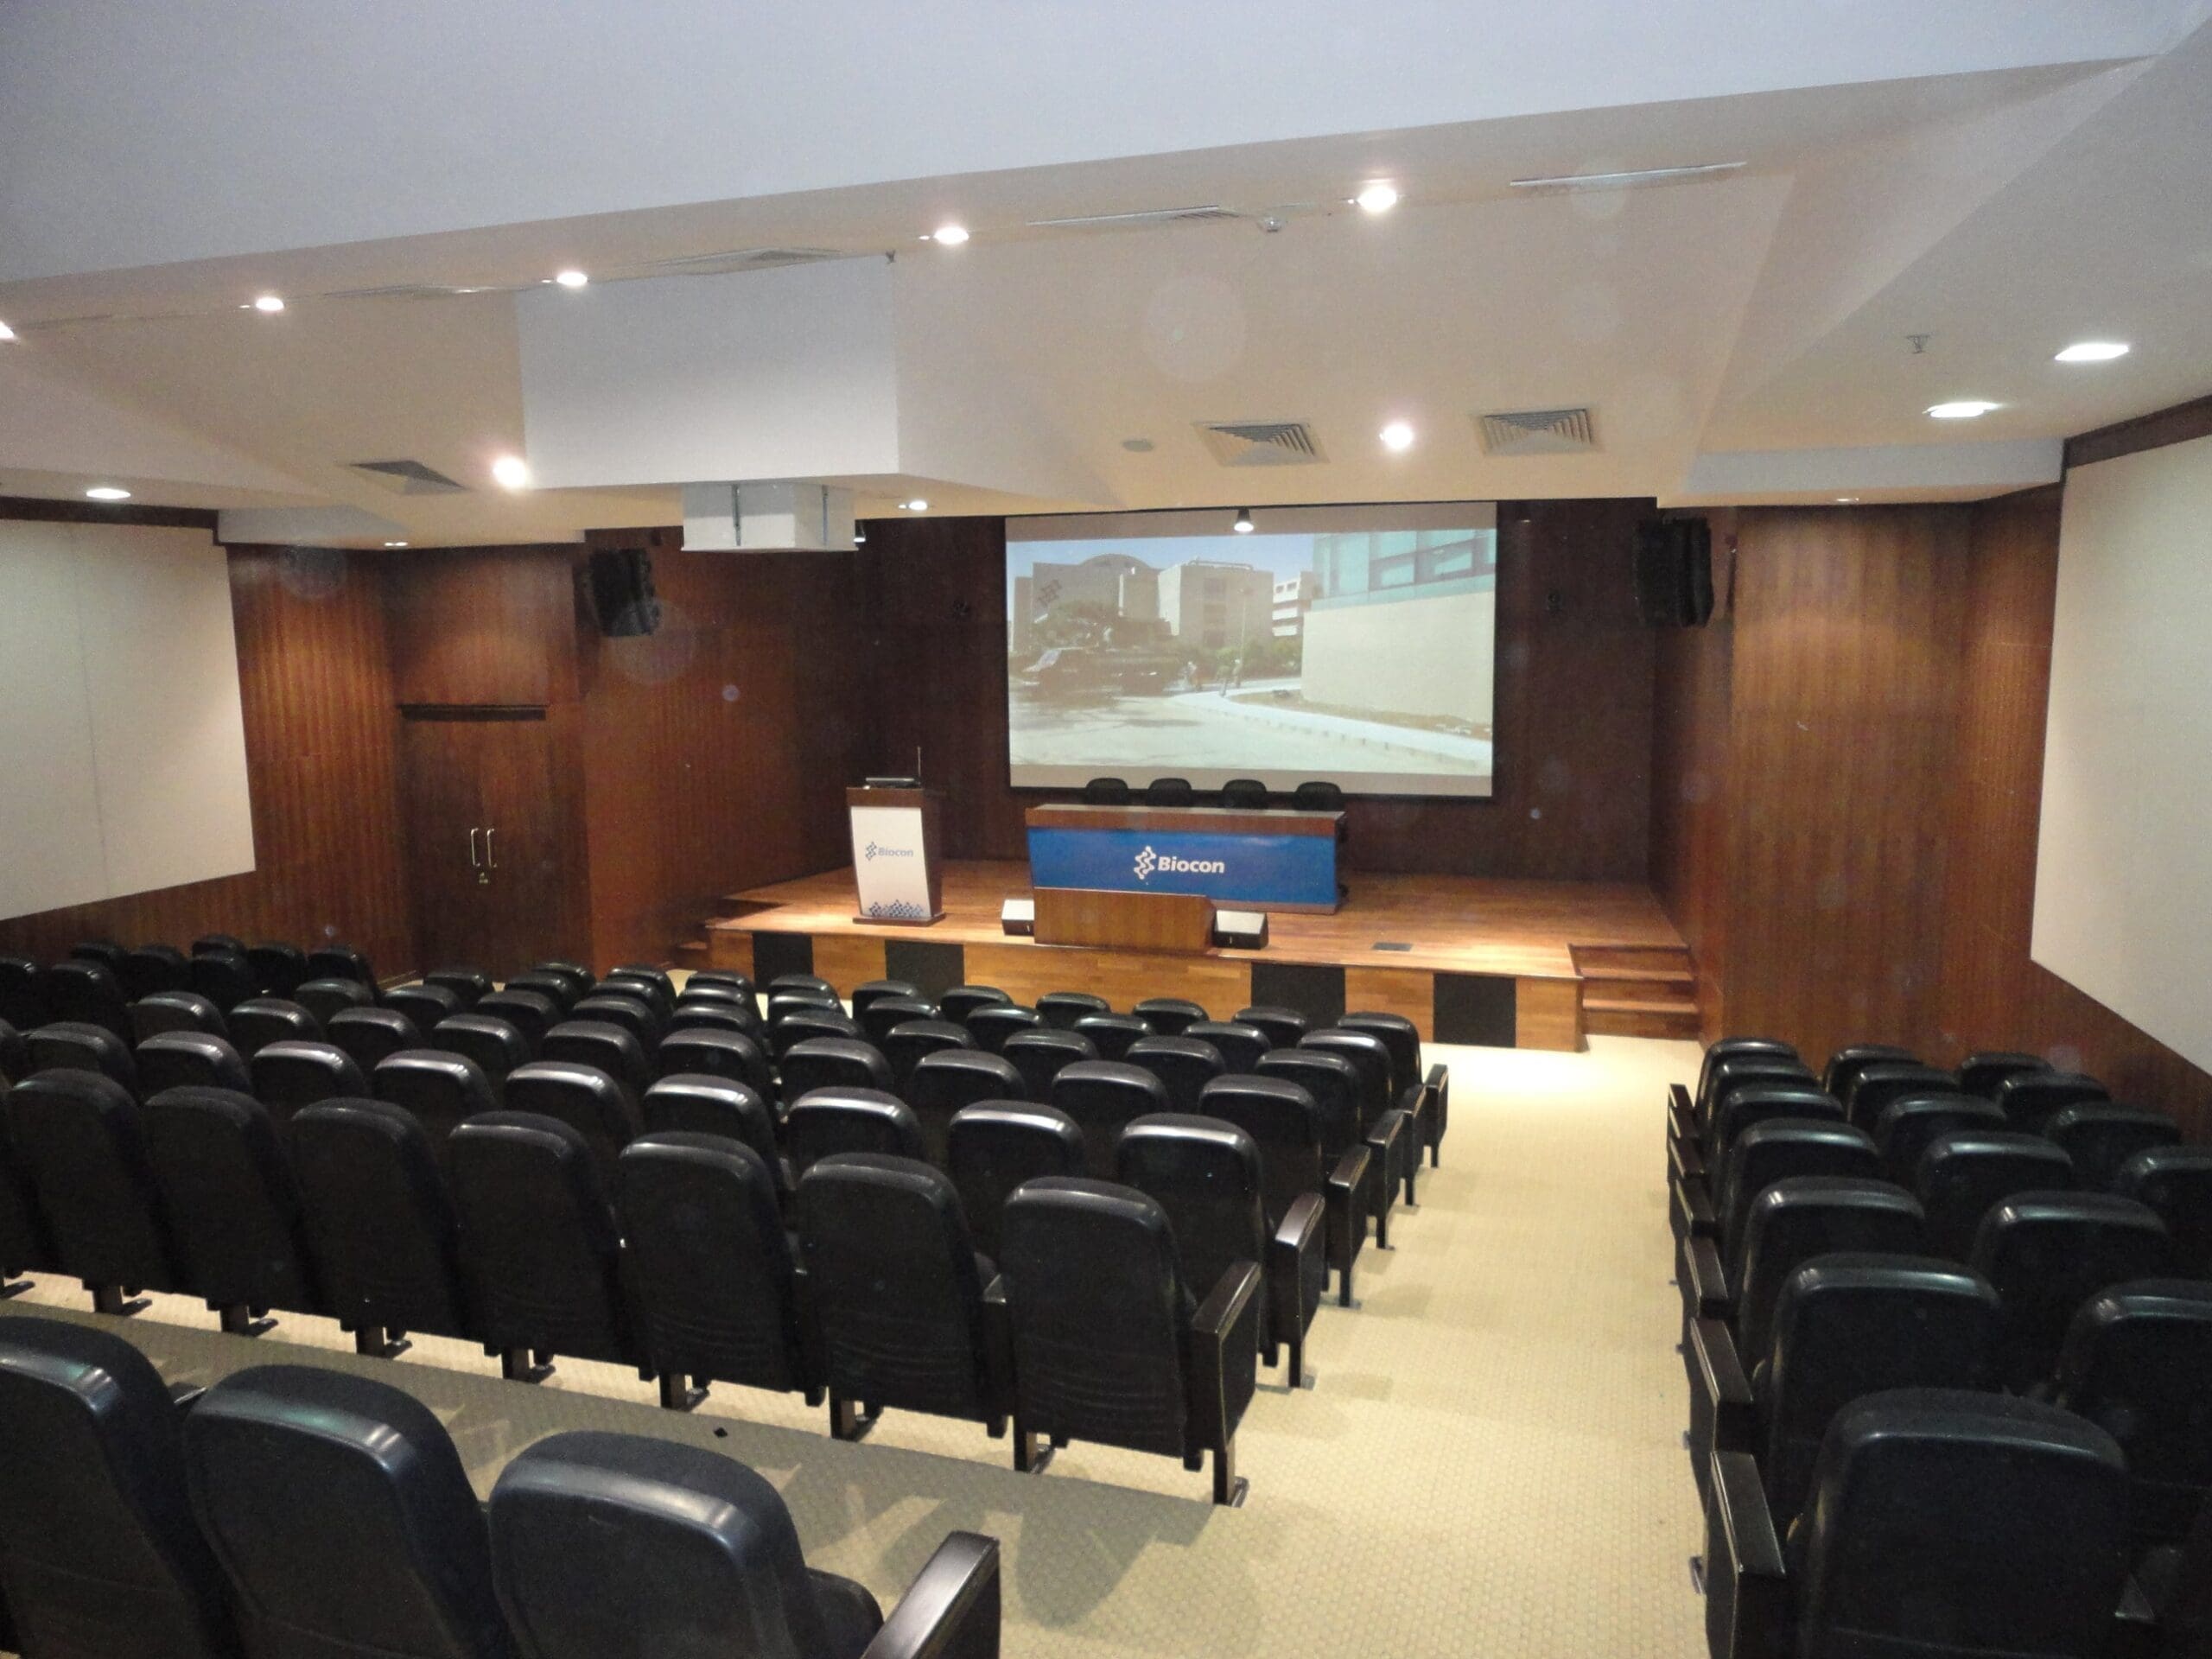 100-seater auditorium with surround sound and projection technology.